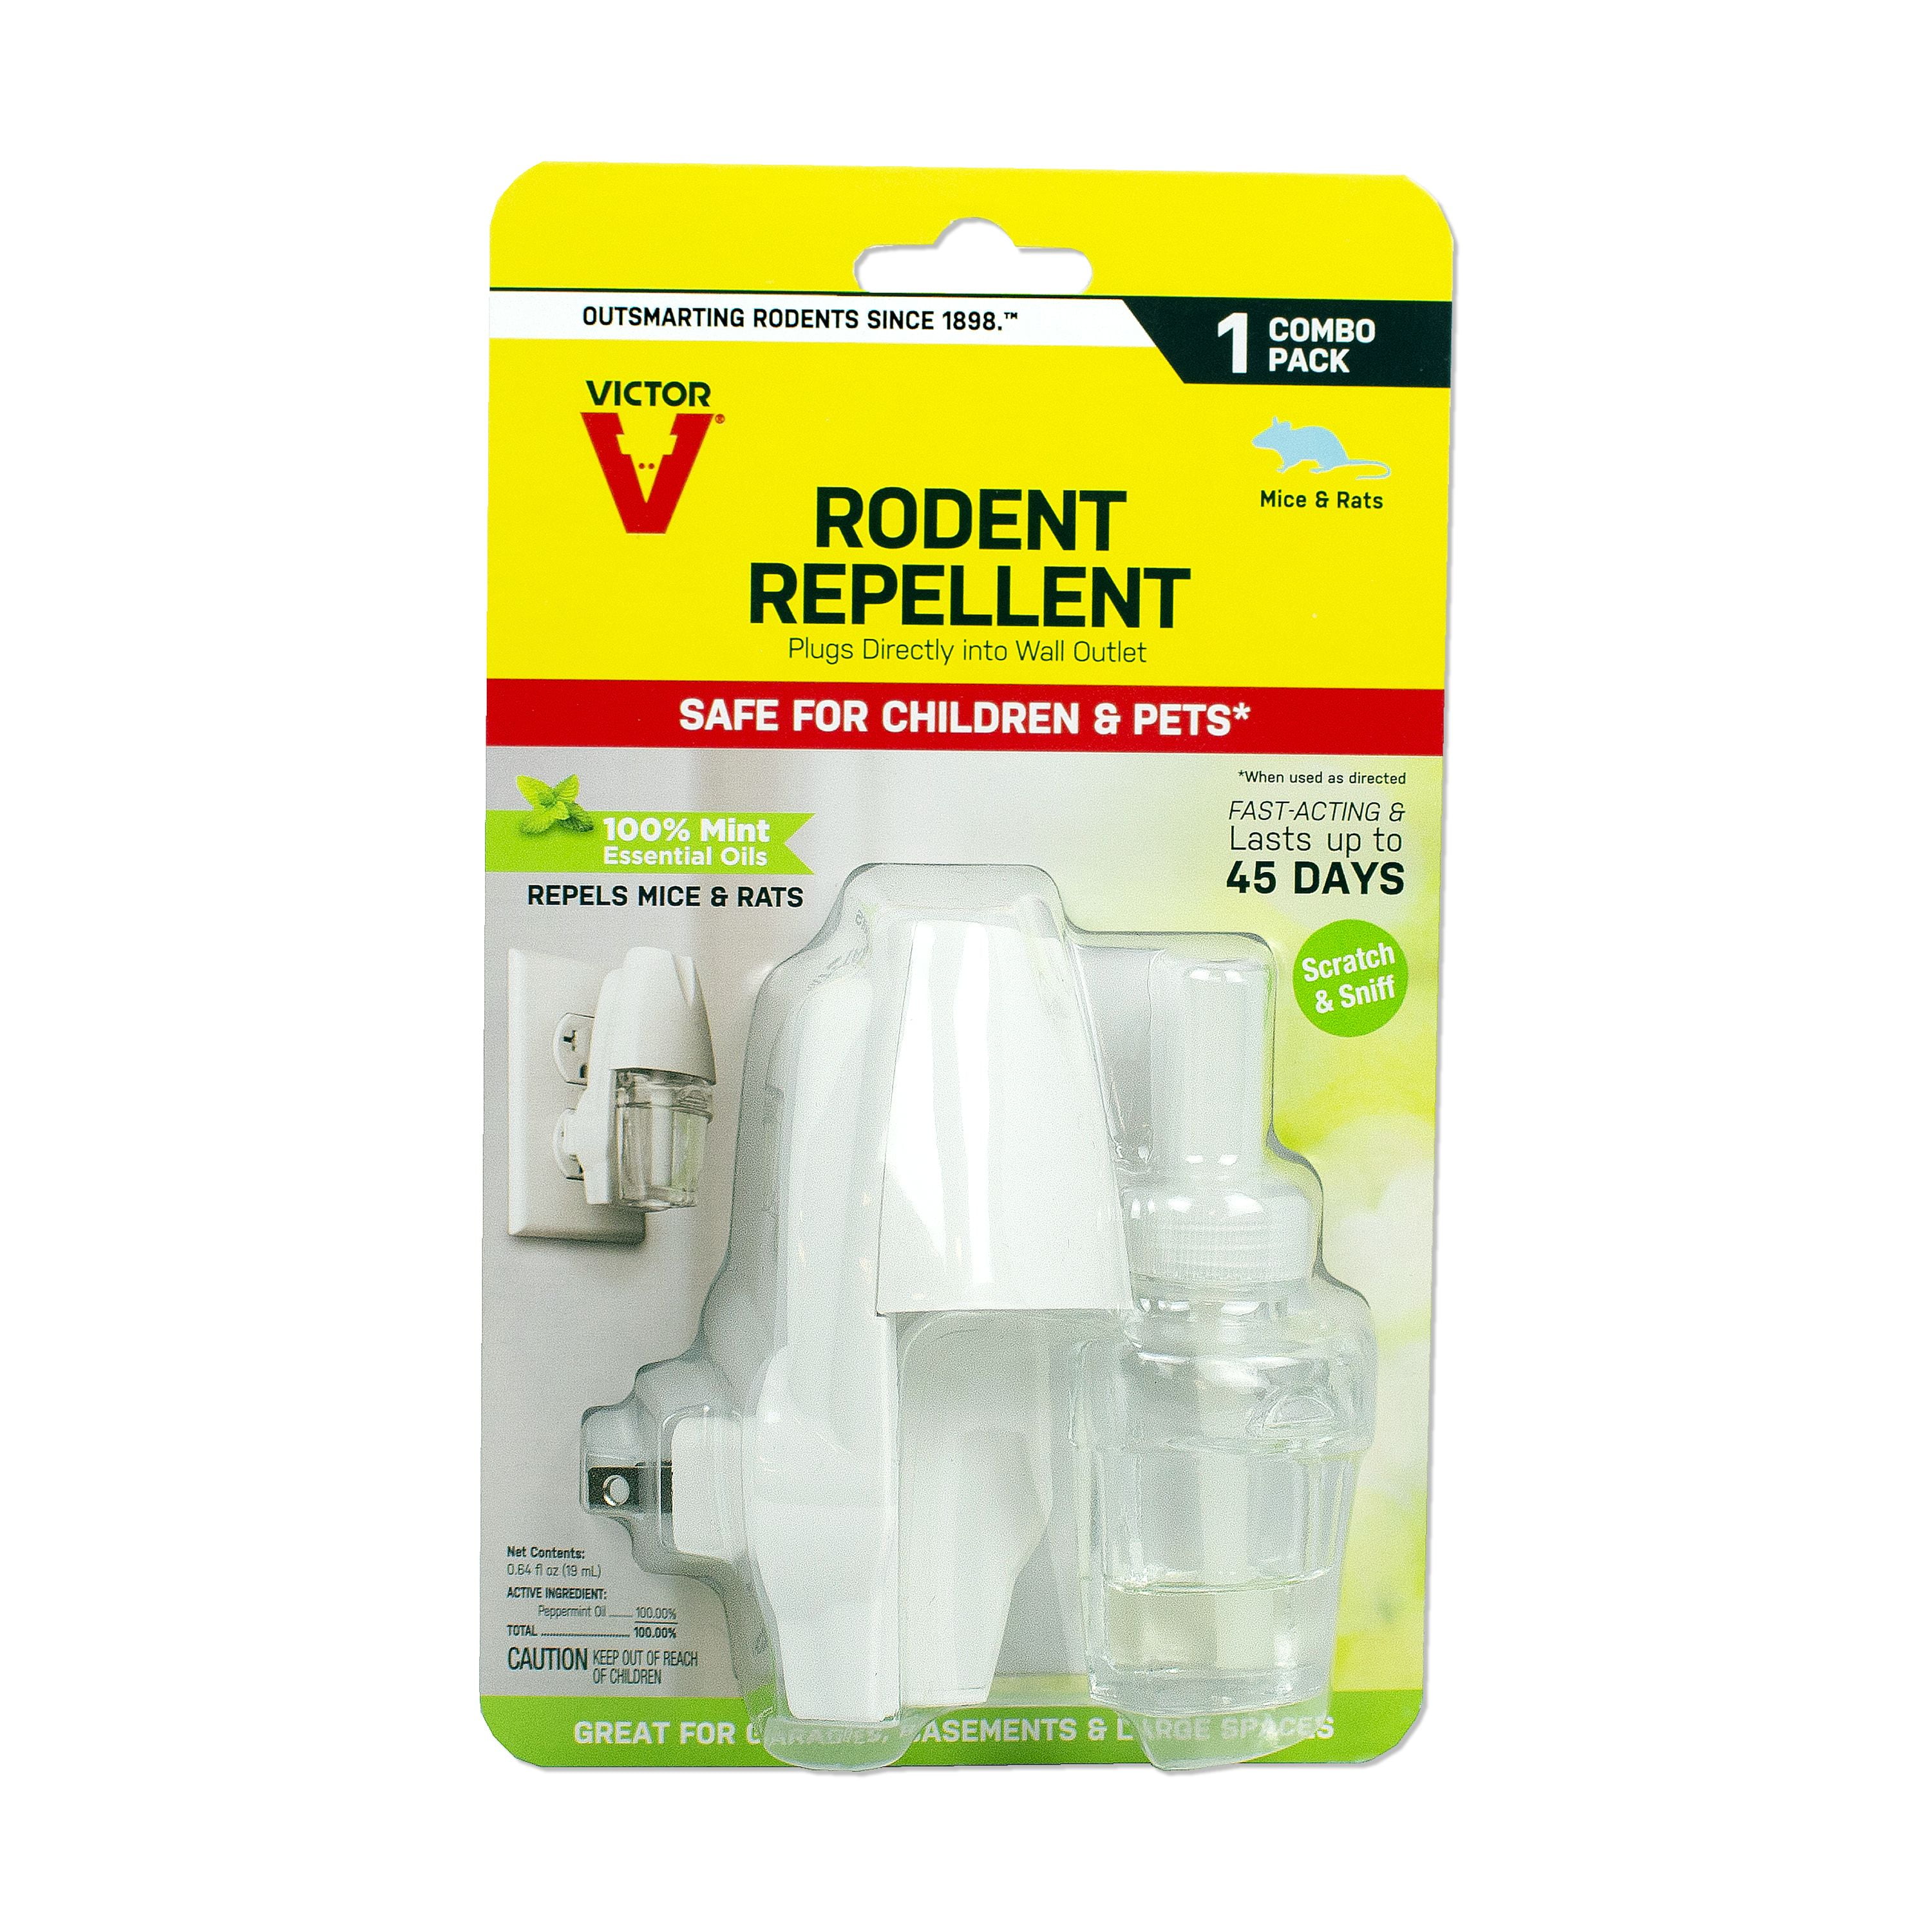 Victor Scent-Away Natural Rodent Repeller, 5 Pack 